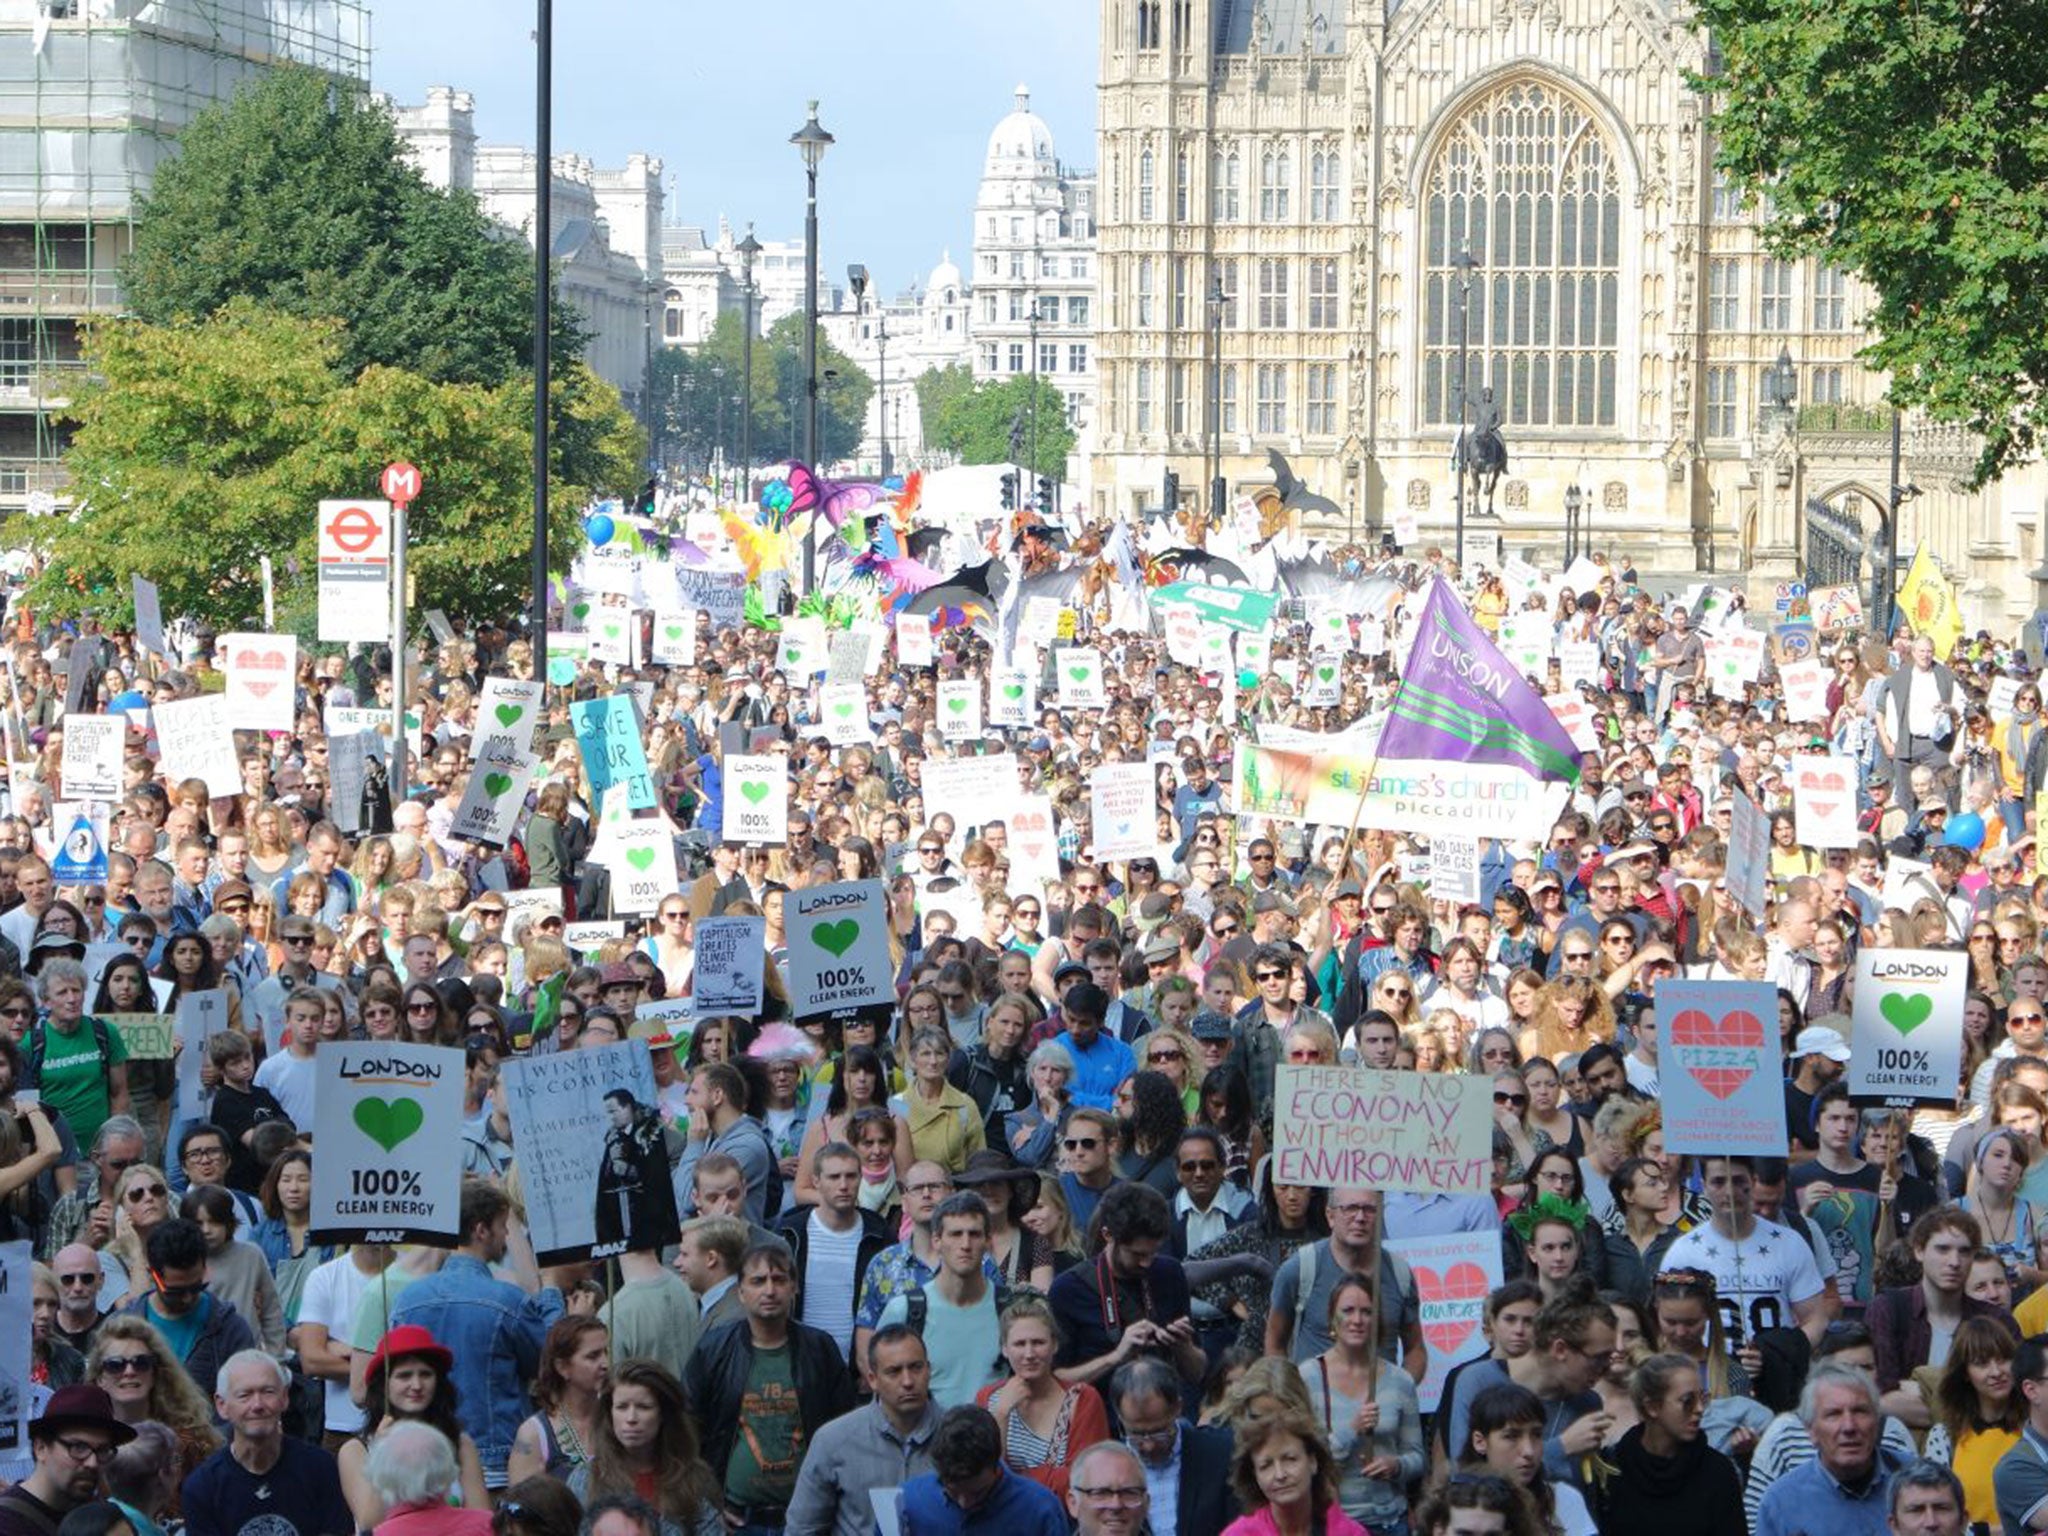 Thousands rallied against climate change this weekend to inspire the world's leaders to take action against the climate crisis